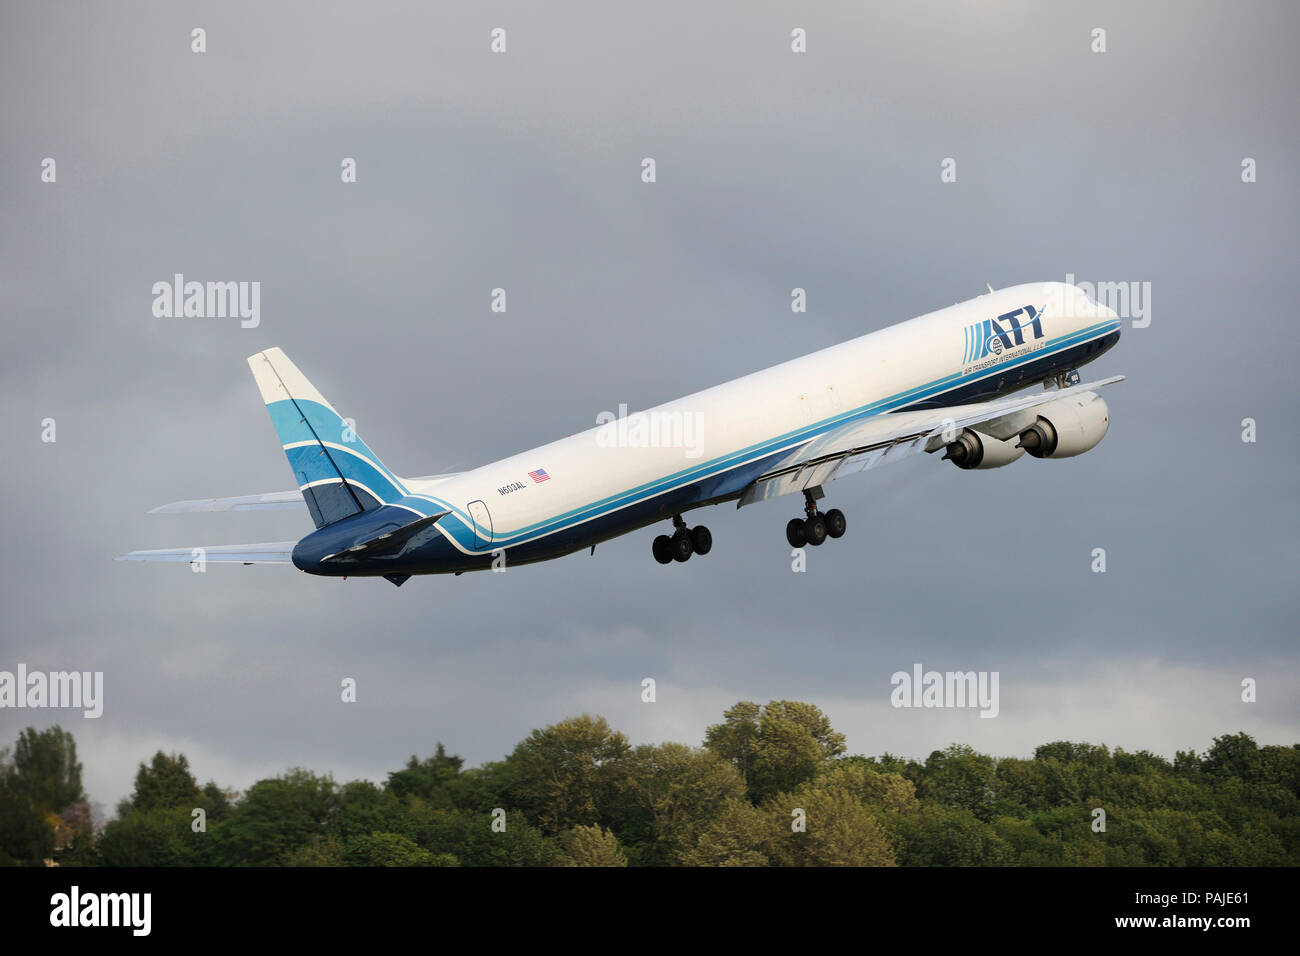 ATI - Air Transport International McDonnell Douglas DC-8-73F climbing out after take-off Stock Photo